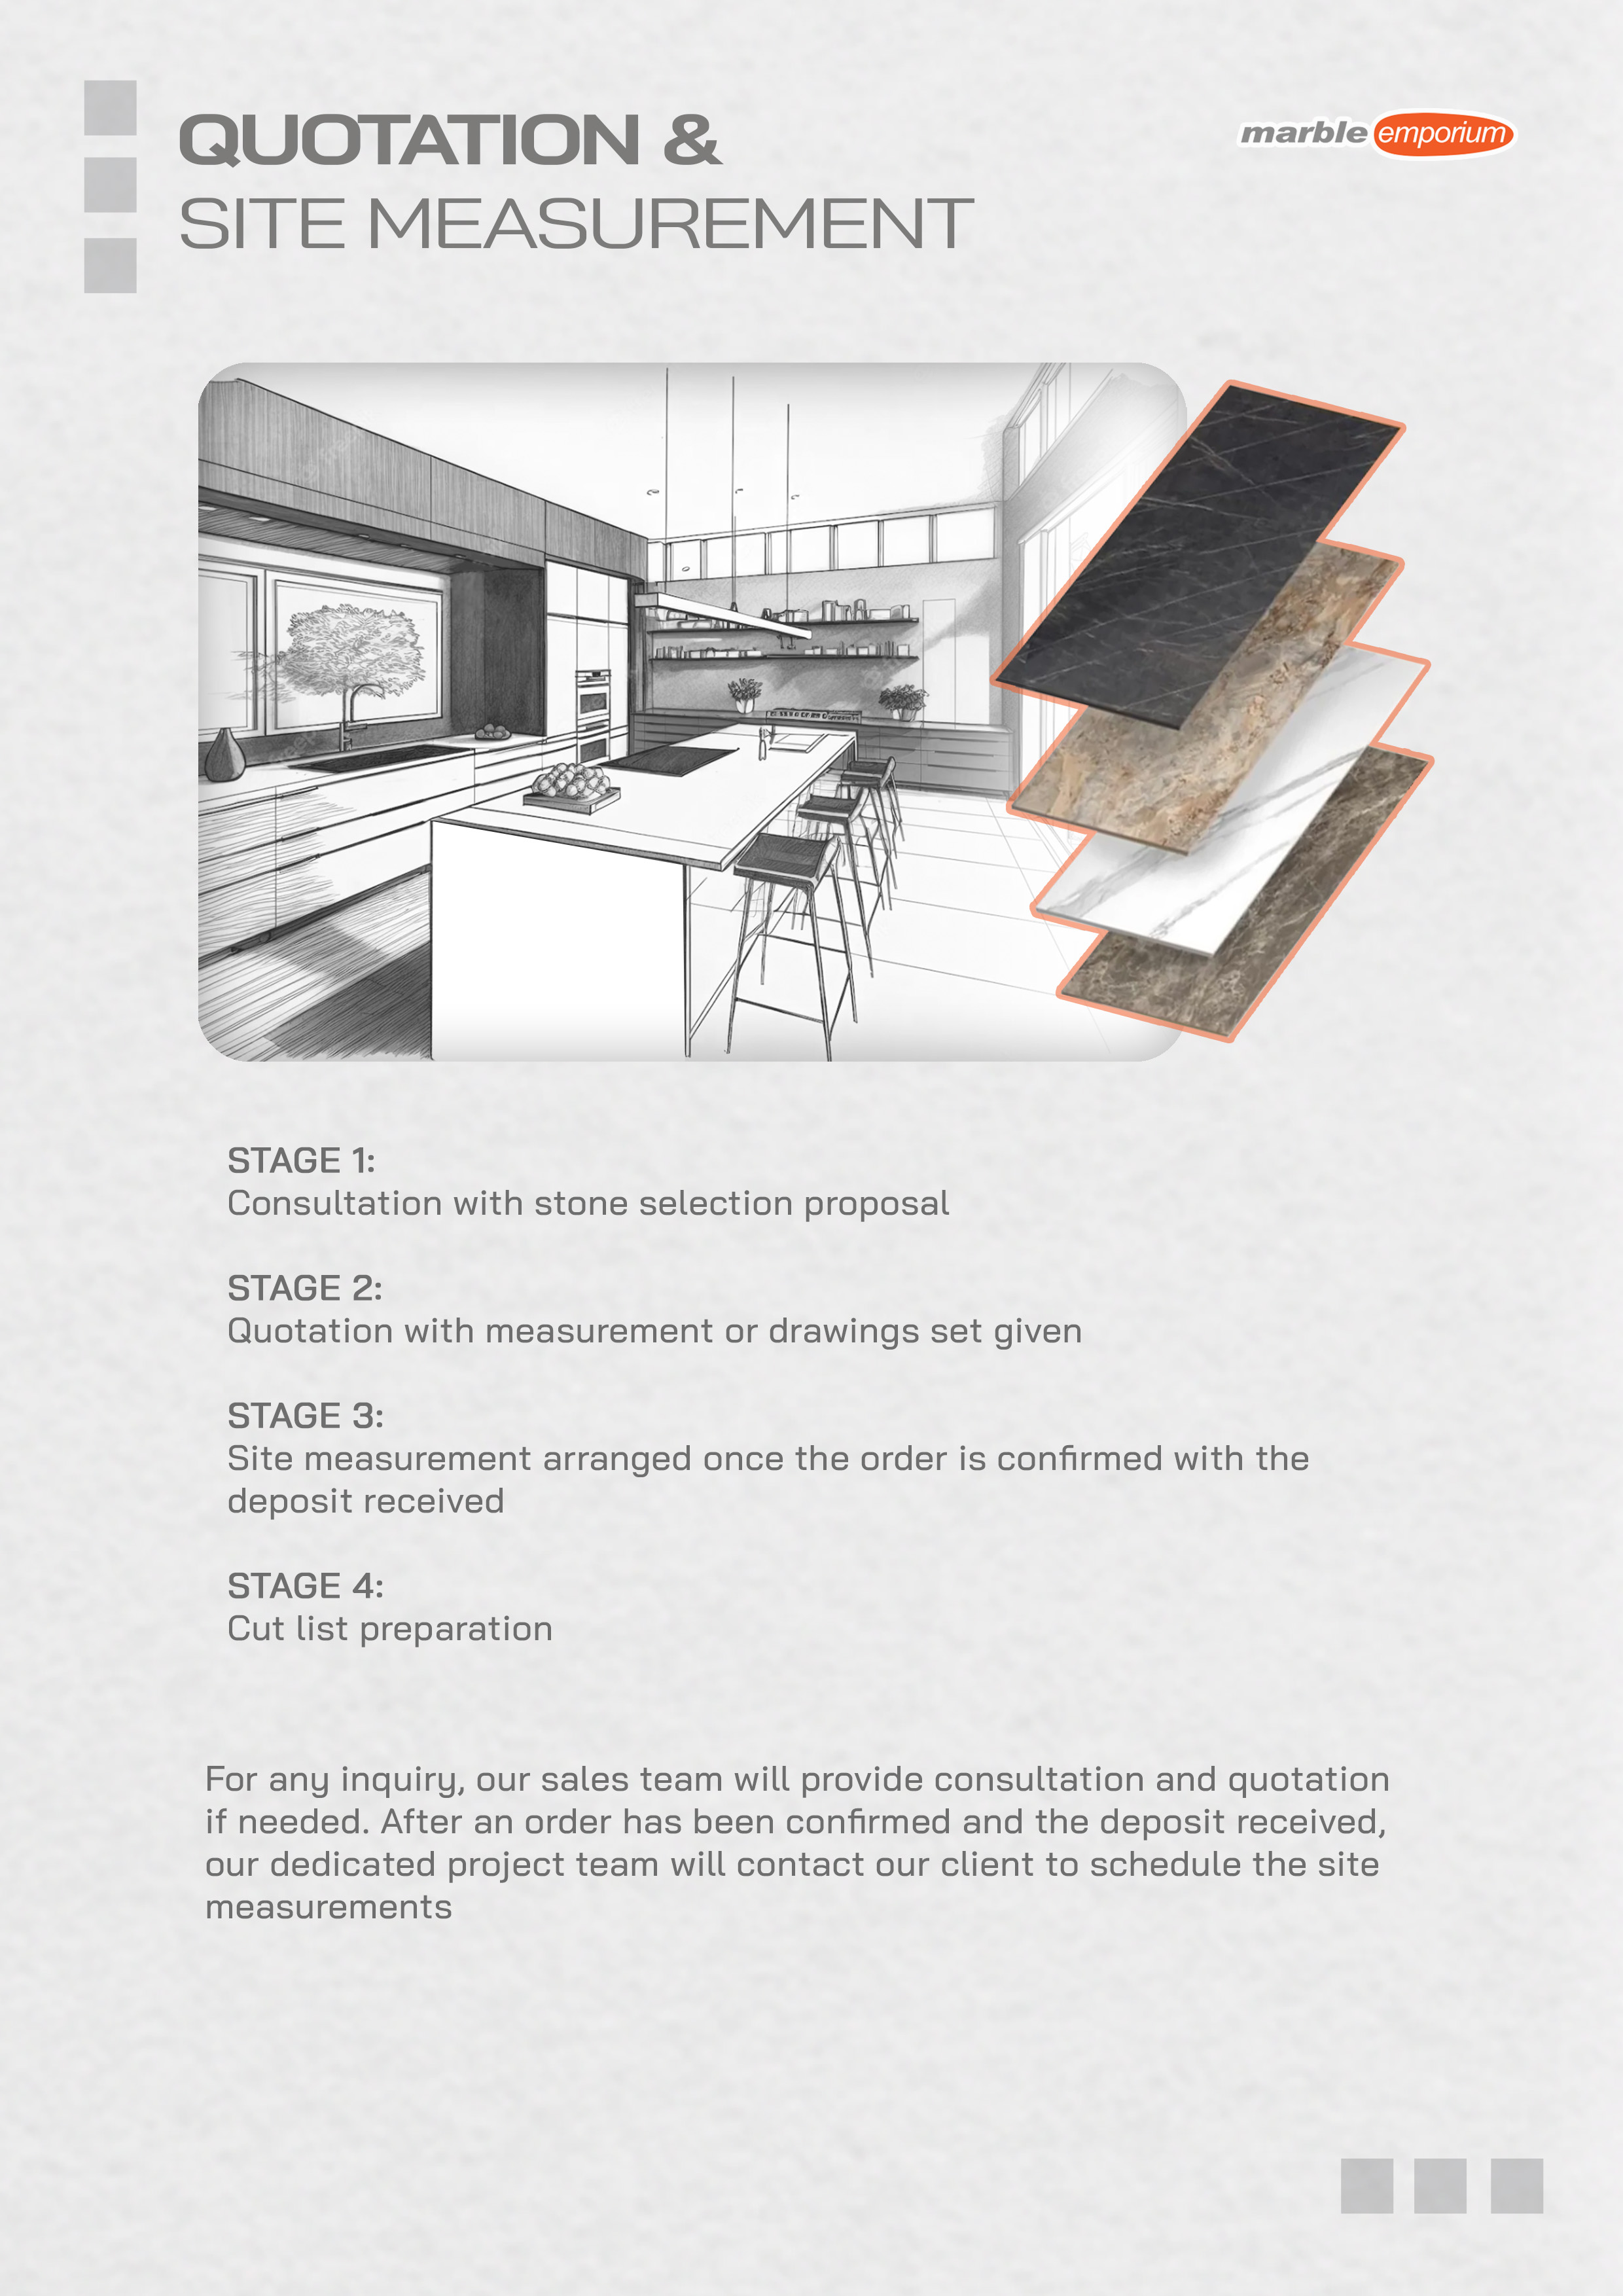 Marble Emporium | How we work page 12 - Quotation & Site Measurement | Stage 1: Consultation with stone selection proposal | Stage 2: Quotation with measurement or drawings set given | Stage 3: Site measurement arranged once the order is confirmed with the deposit received | Stage 4: Cut list preparation | For any inquiry, our sales team will provide consultation and quotation if needed. After an order has been confirmed and the deposit received, our dedicated project team will contact our client to schedule the site measurements.